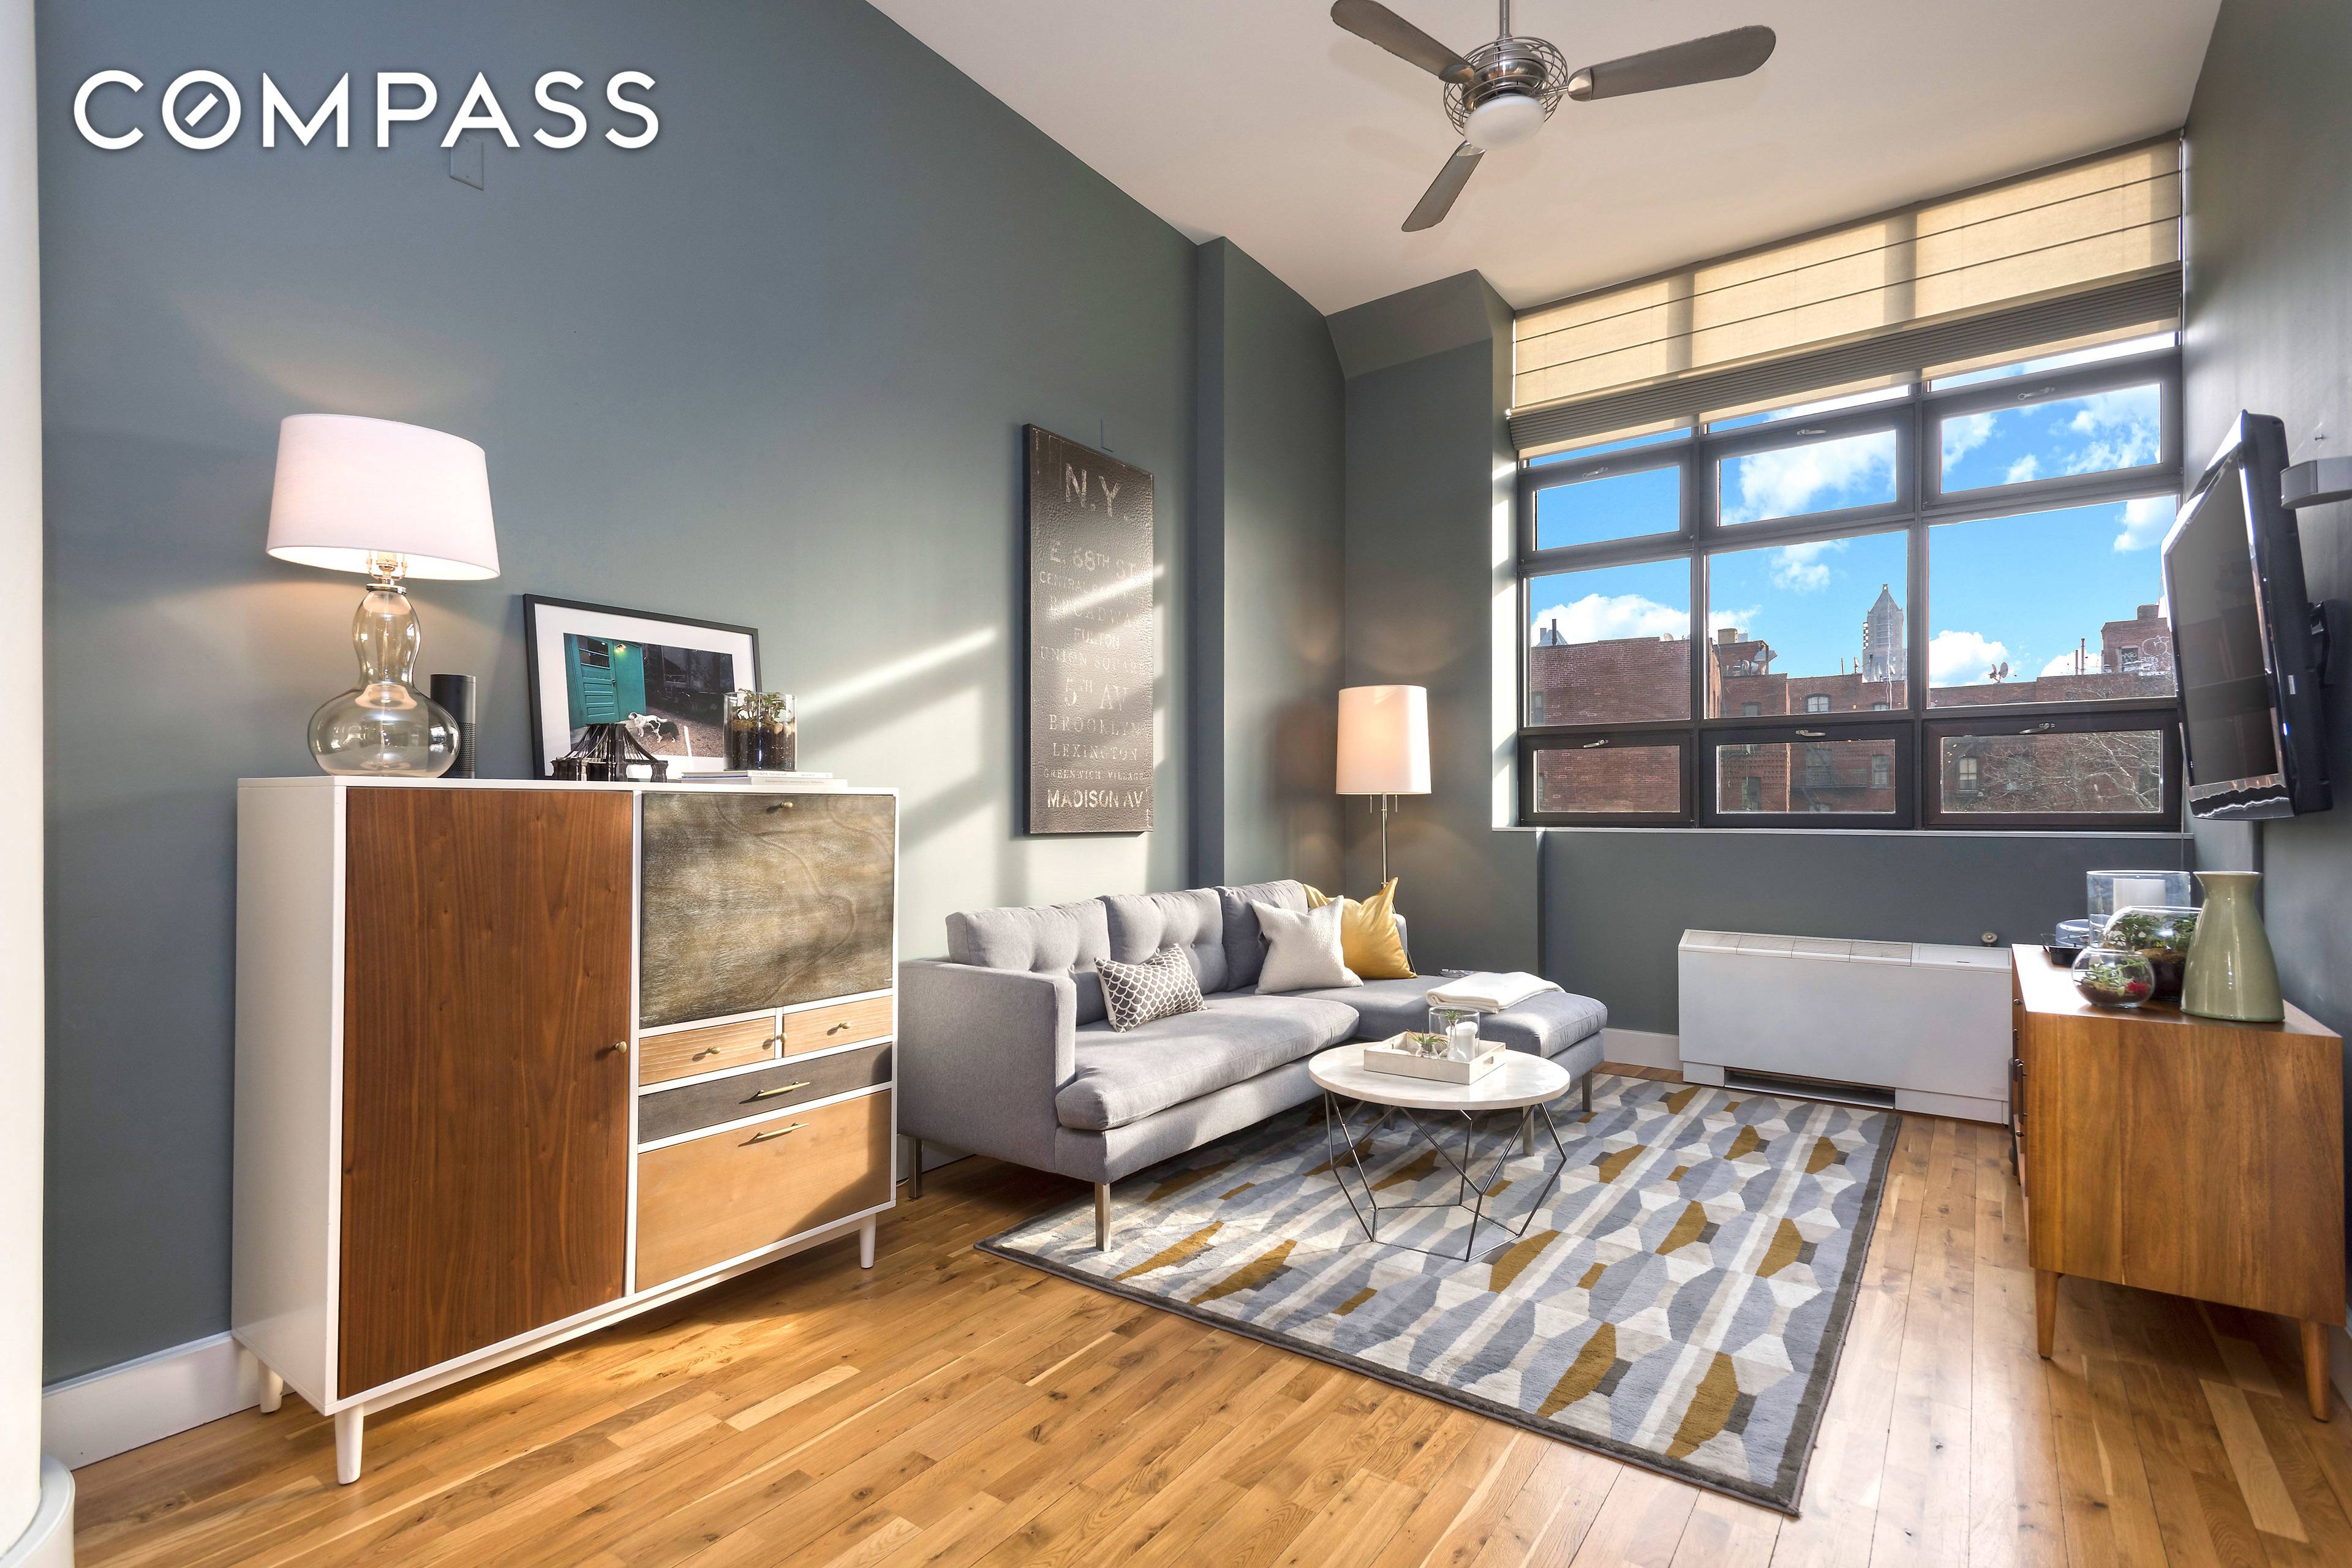 BROOKLYN HTS LOFT STYLE CONDO ONE BEDROOM FULL SERVICE BUILDING 975, 000 LIVING ROOM 13 Foot Ceilings Oversized Wall of Windows Eastern Exposures Flooded with Natural Light Panoramic Downtown Brooklyn ...